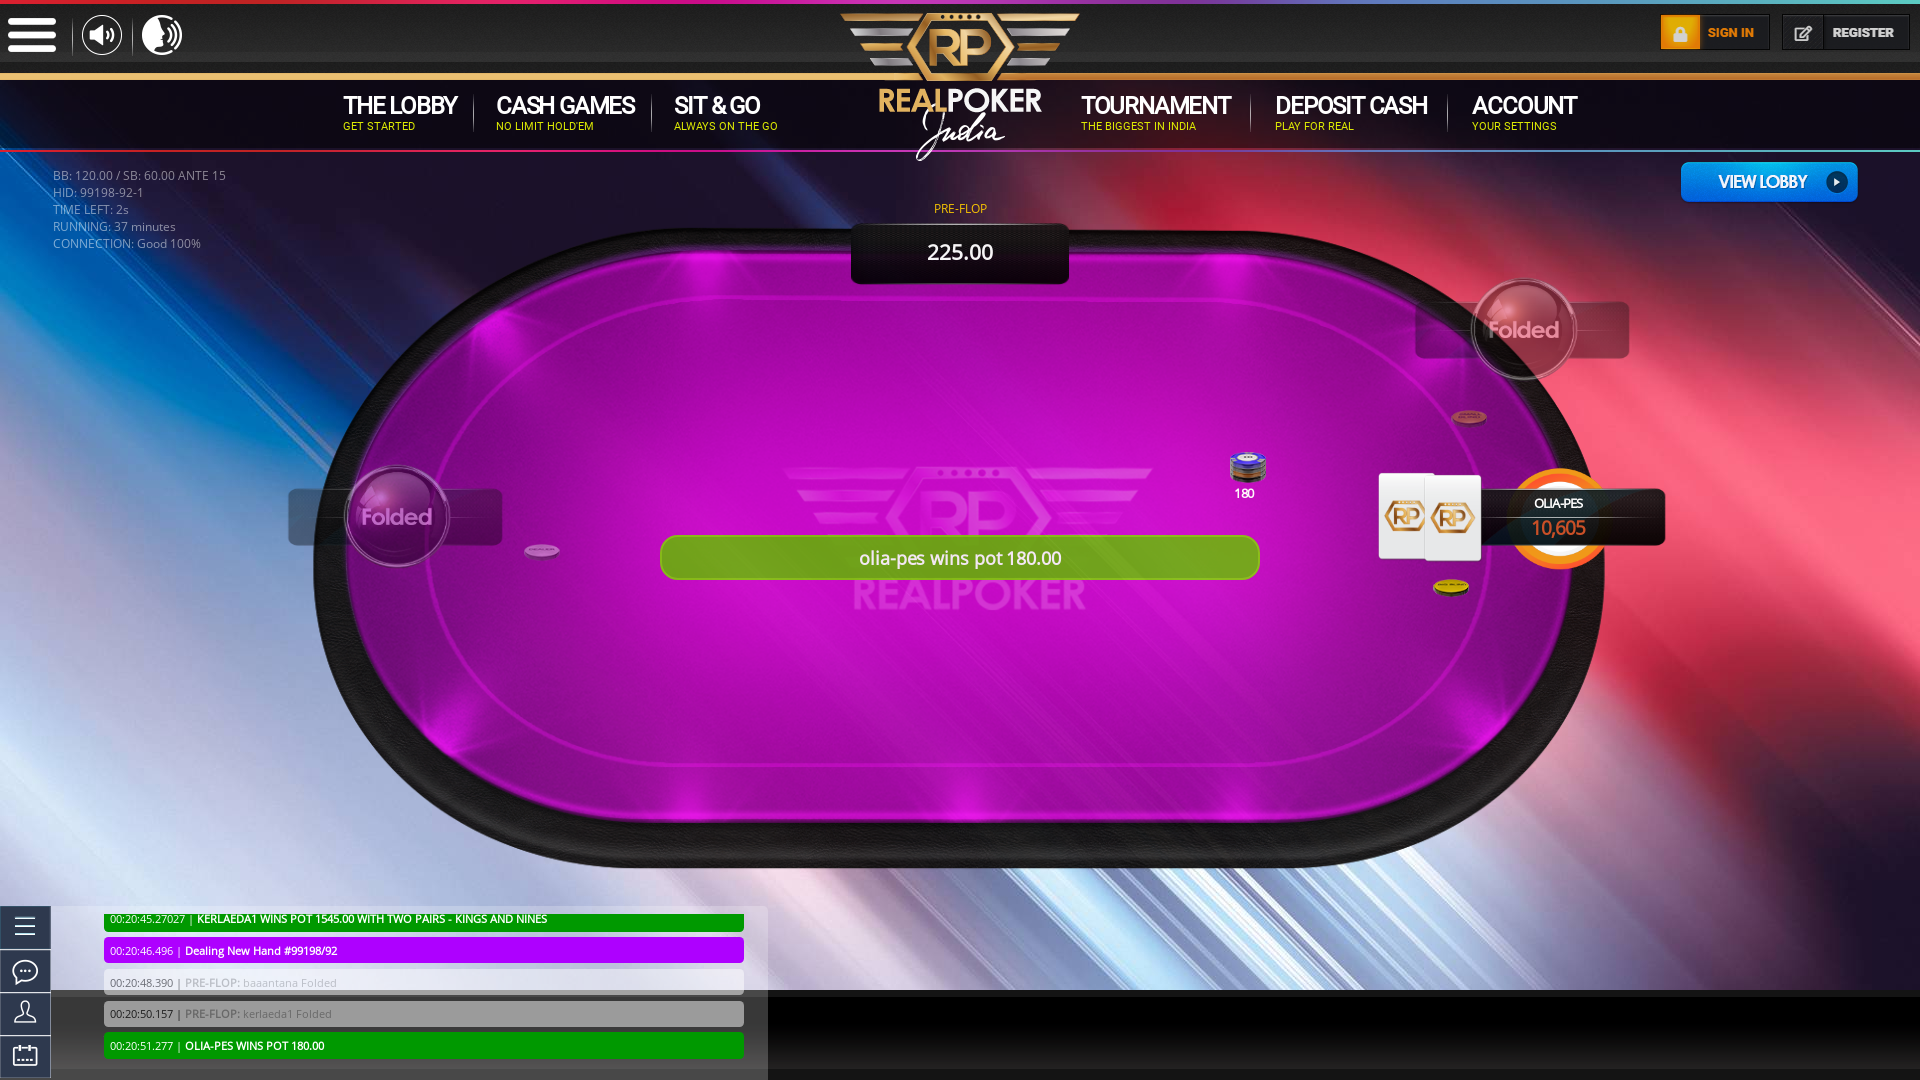 Indian online poker on a 10 player table in the 37th minute match up